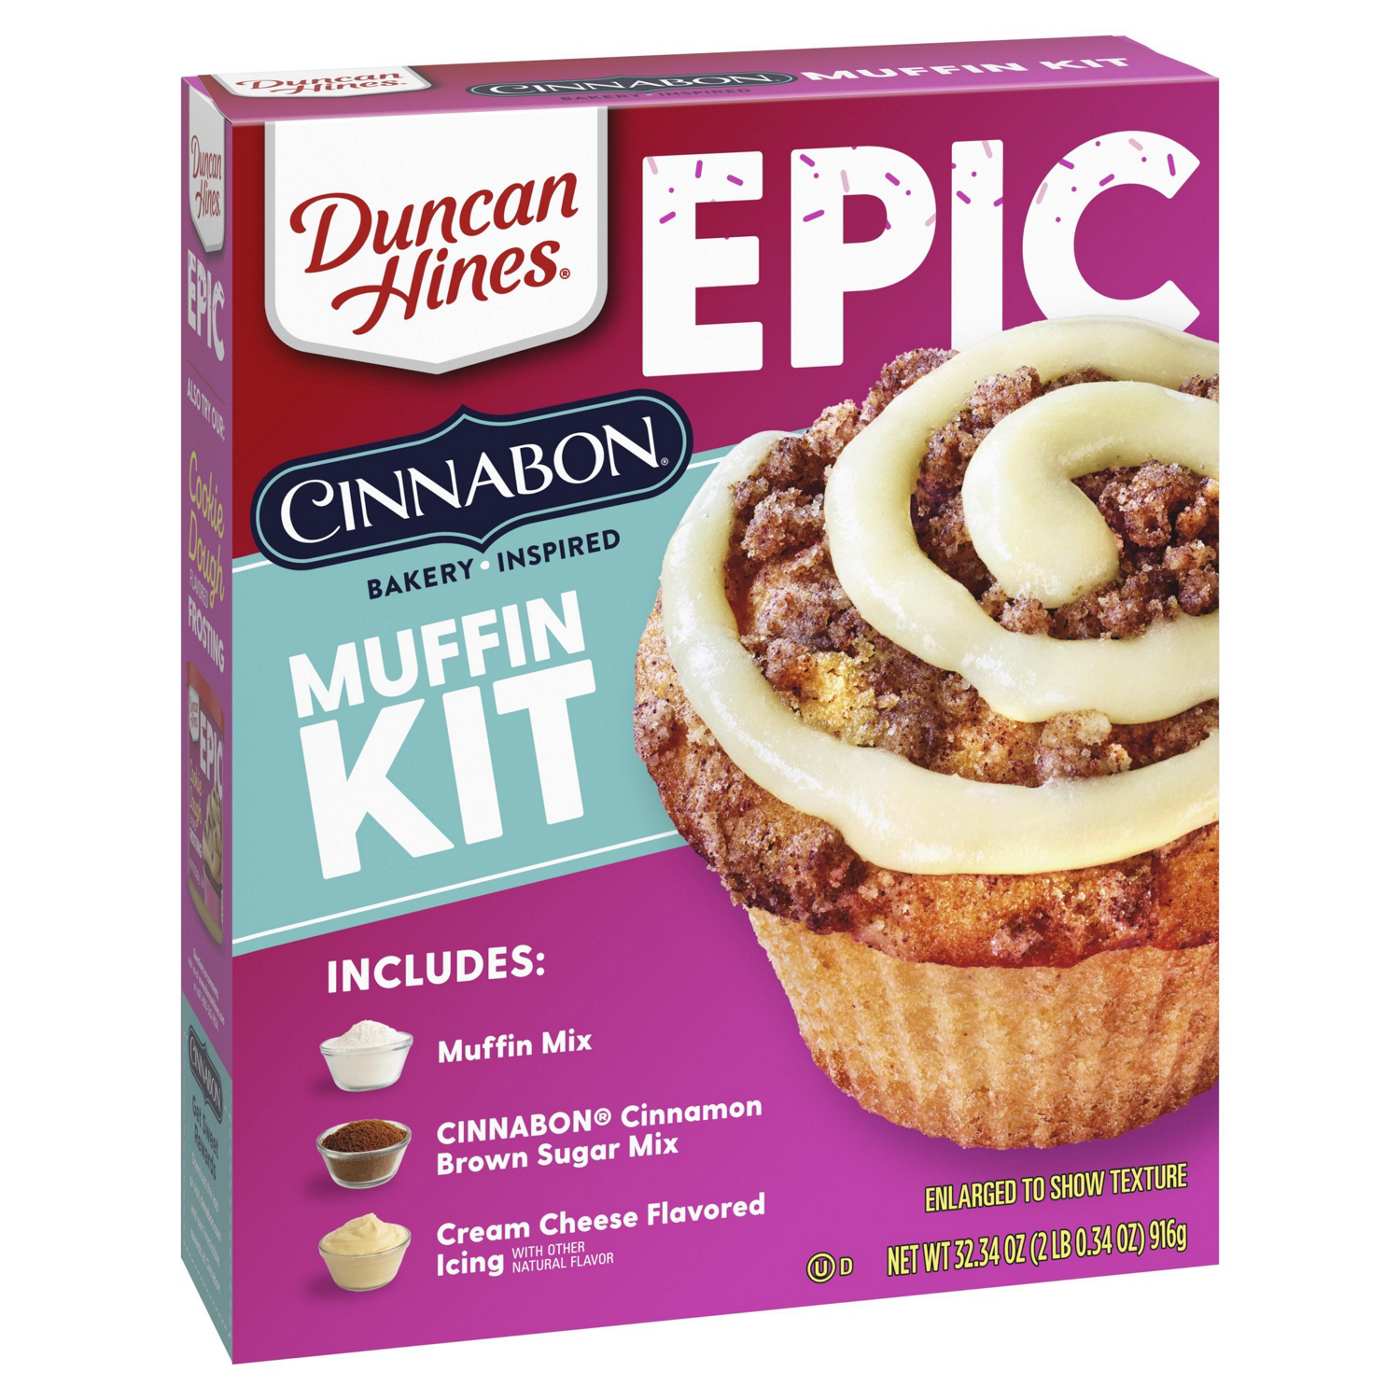 Duncan Hines Epic Cinnabon Bakery Inspired Muffin Kit; image 4 of 5